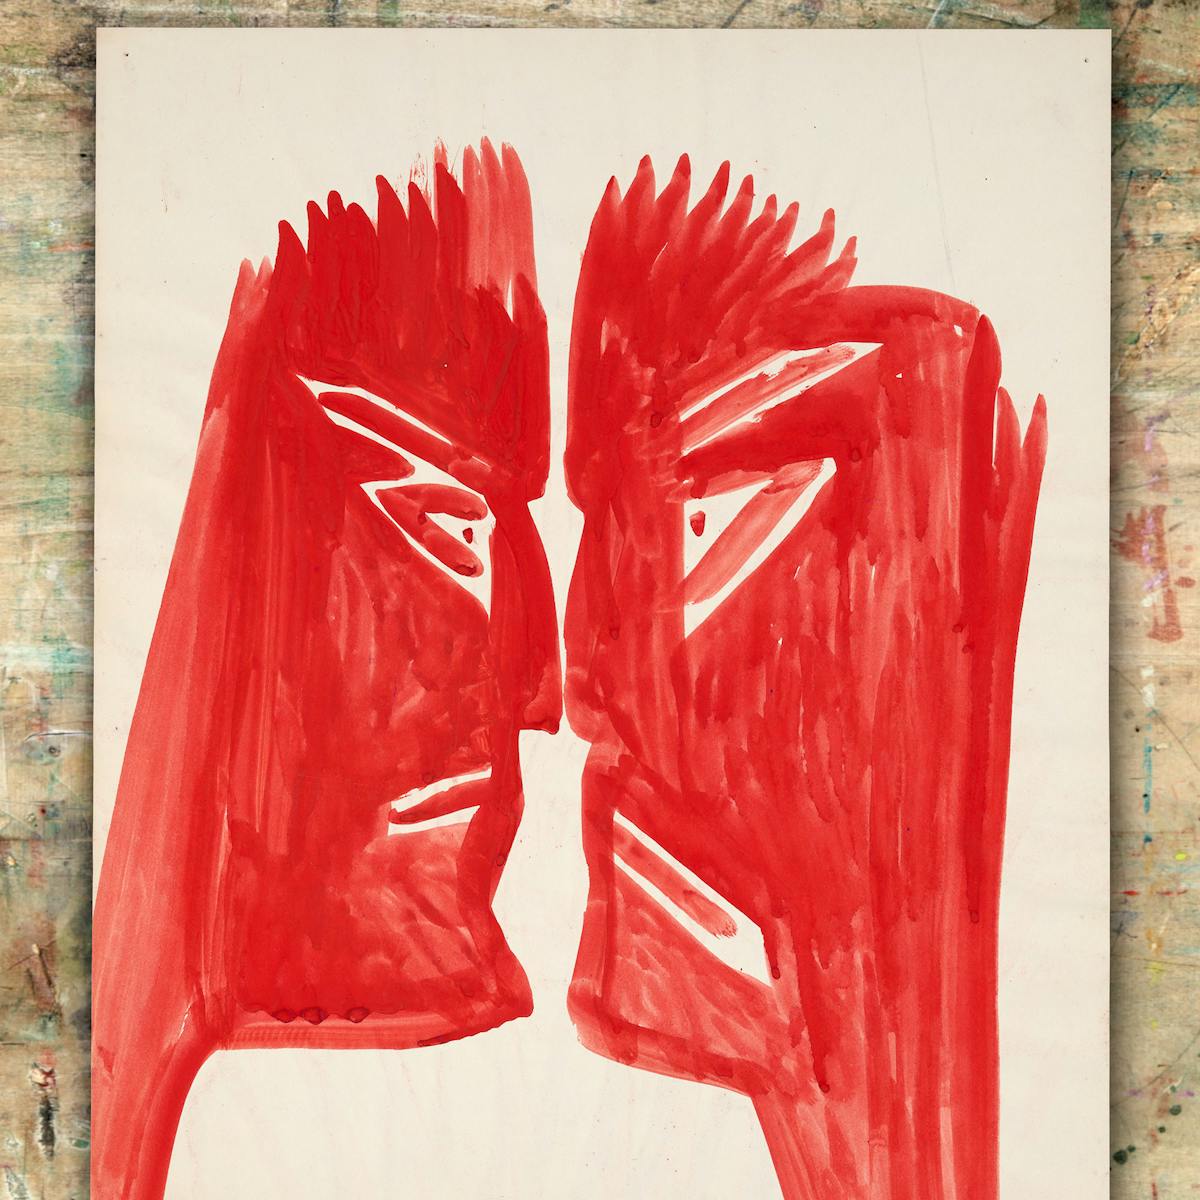 Image of a watercolour artwork resting on a paint splattered wooden artist's board. The watercolour artwork shows two faces in profile, staring at each other, nose to nose. Each face is painted solely in red and the expression on both is one of anger.